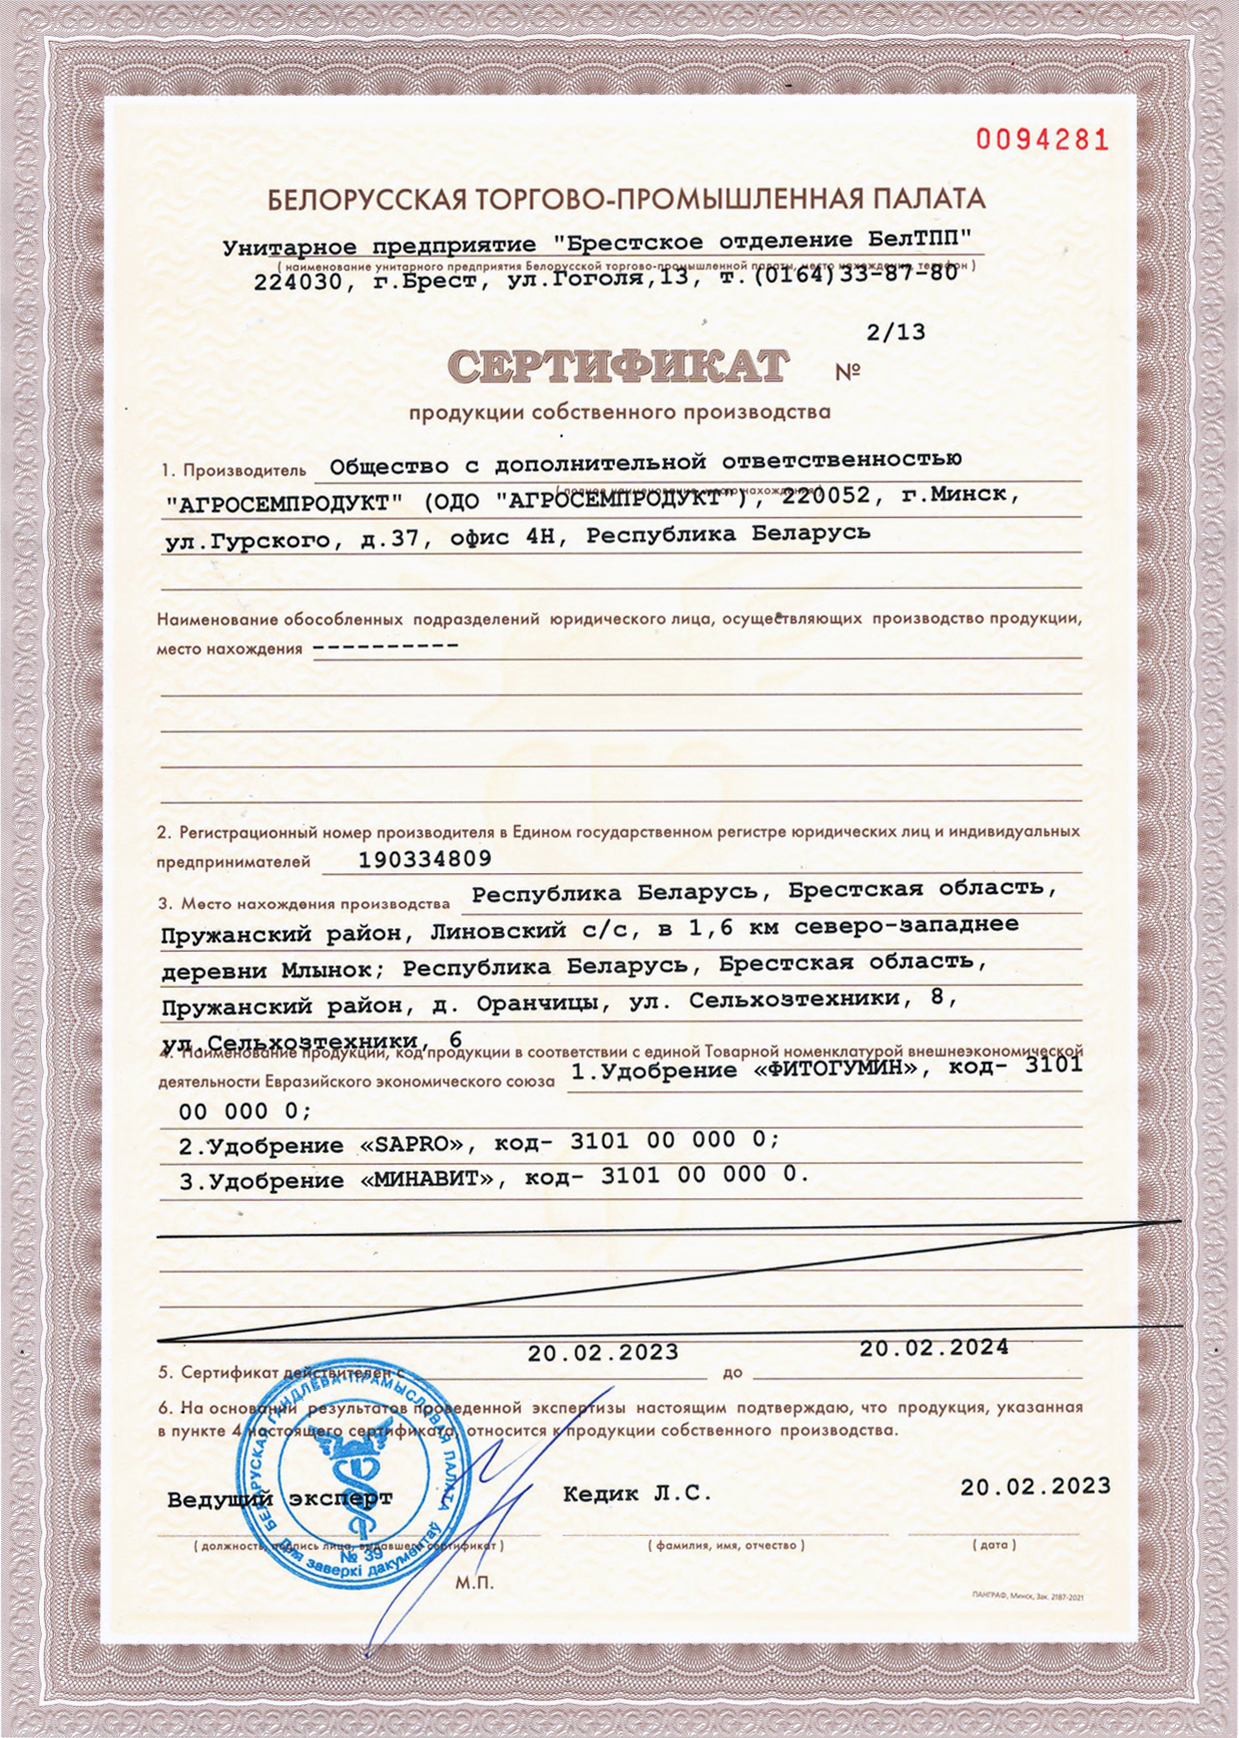 certificate of own production No. 2/13 from 20.02.2023.